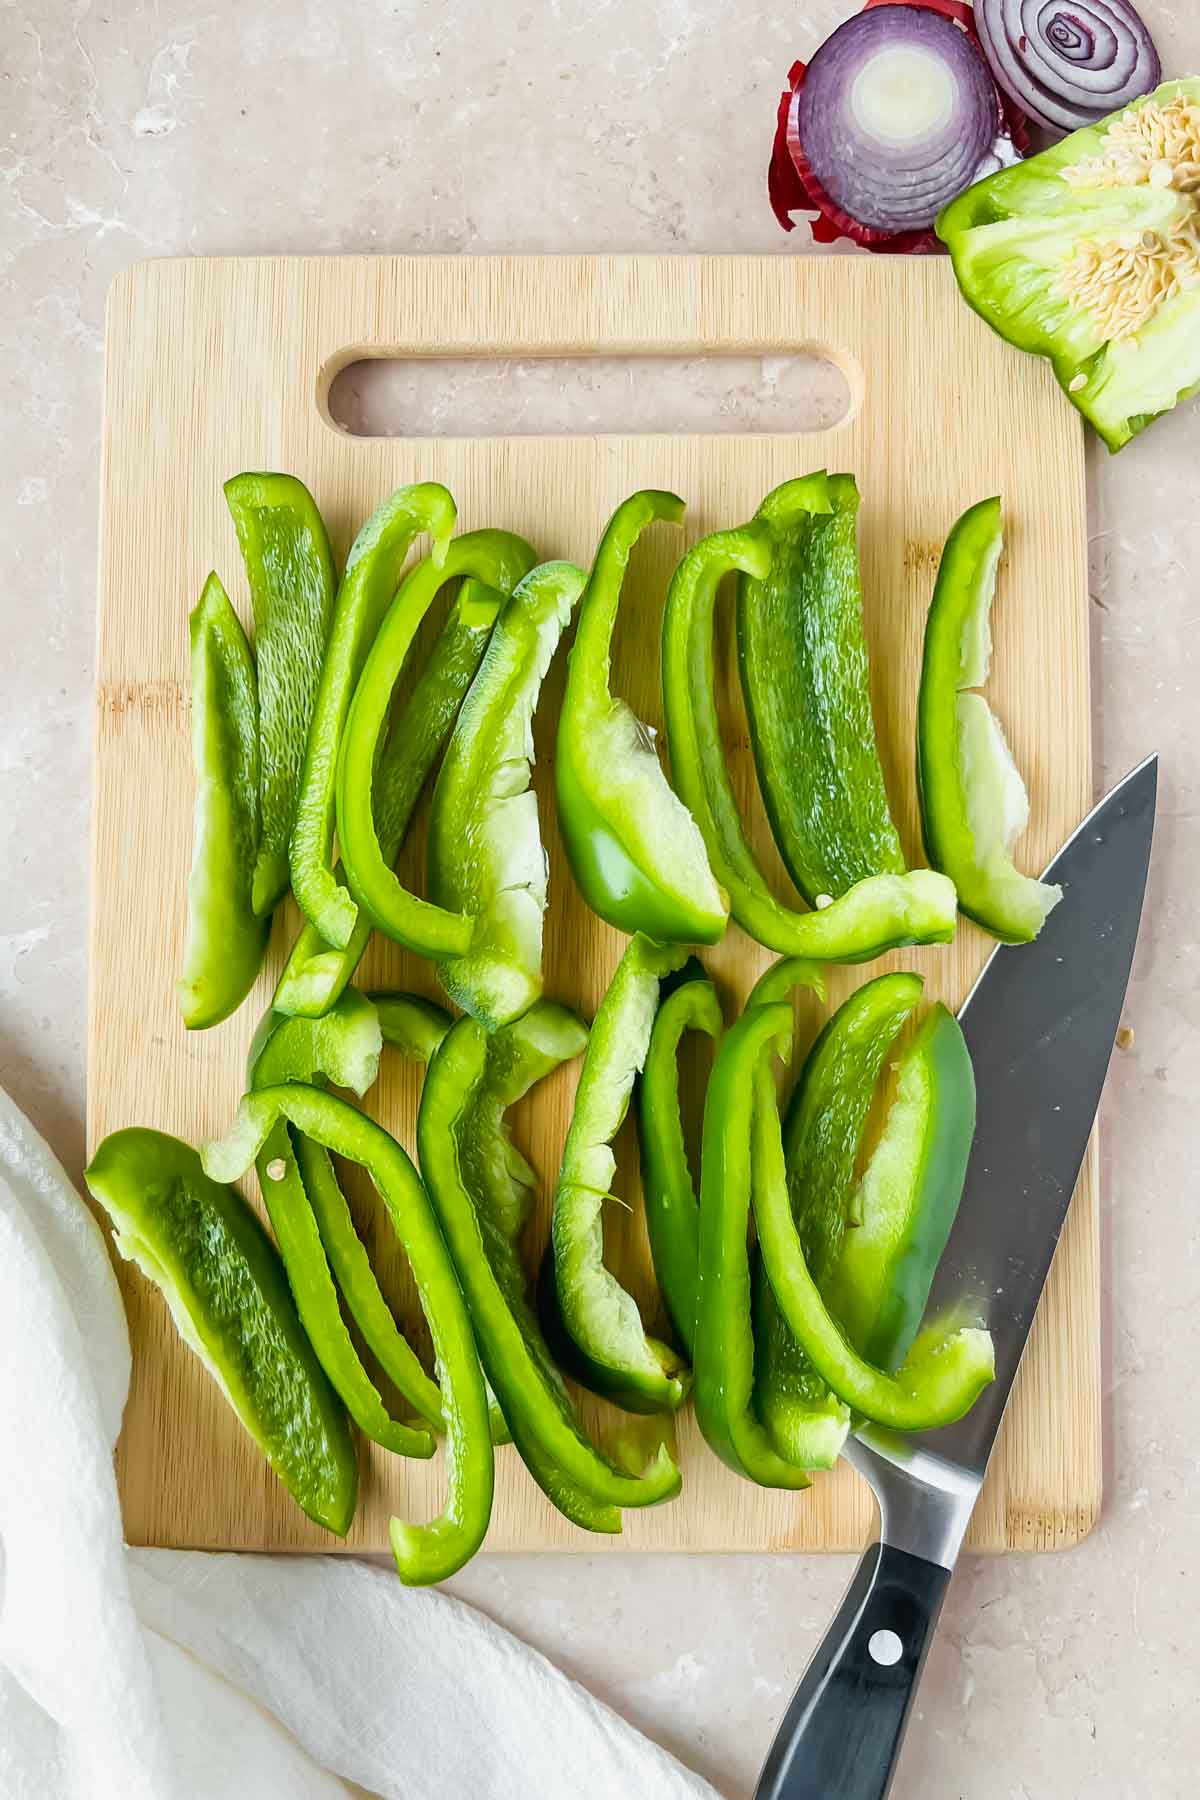 sliced green bell peppers on wood cutting board.